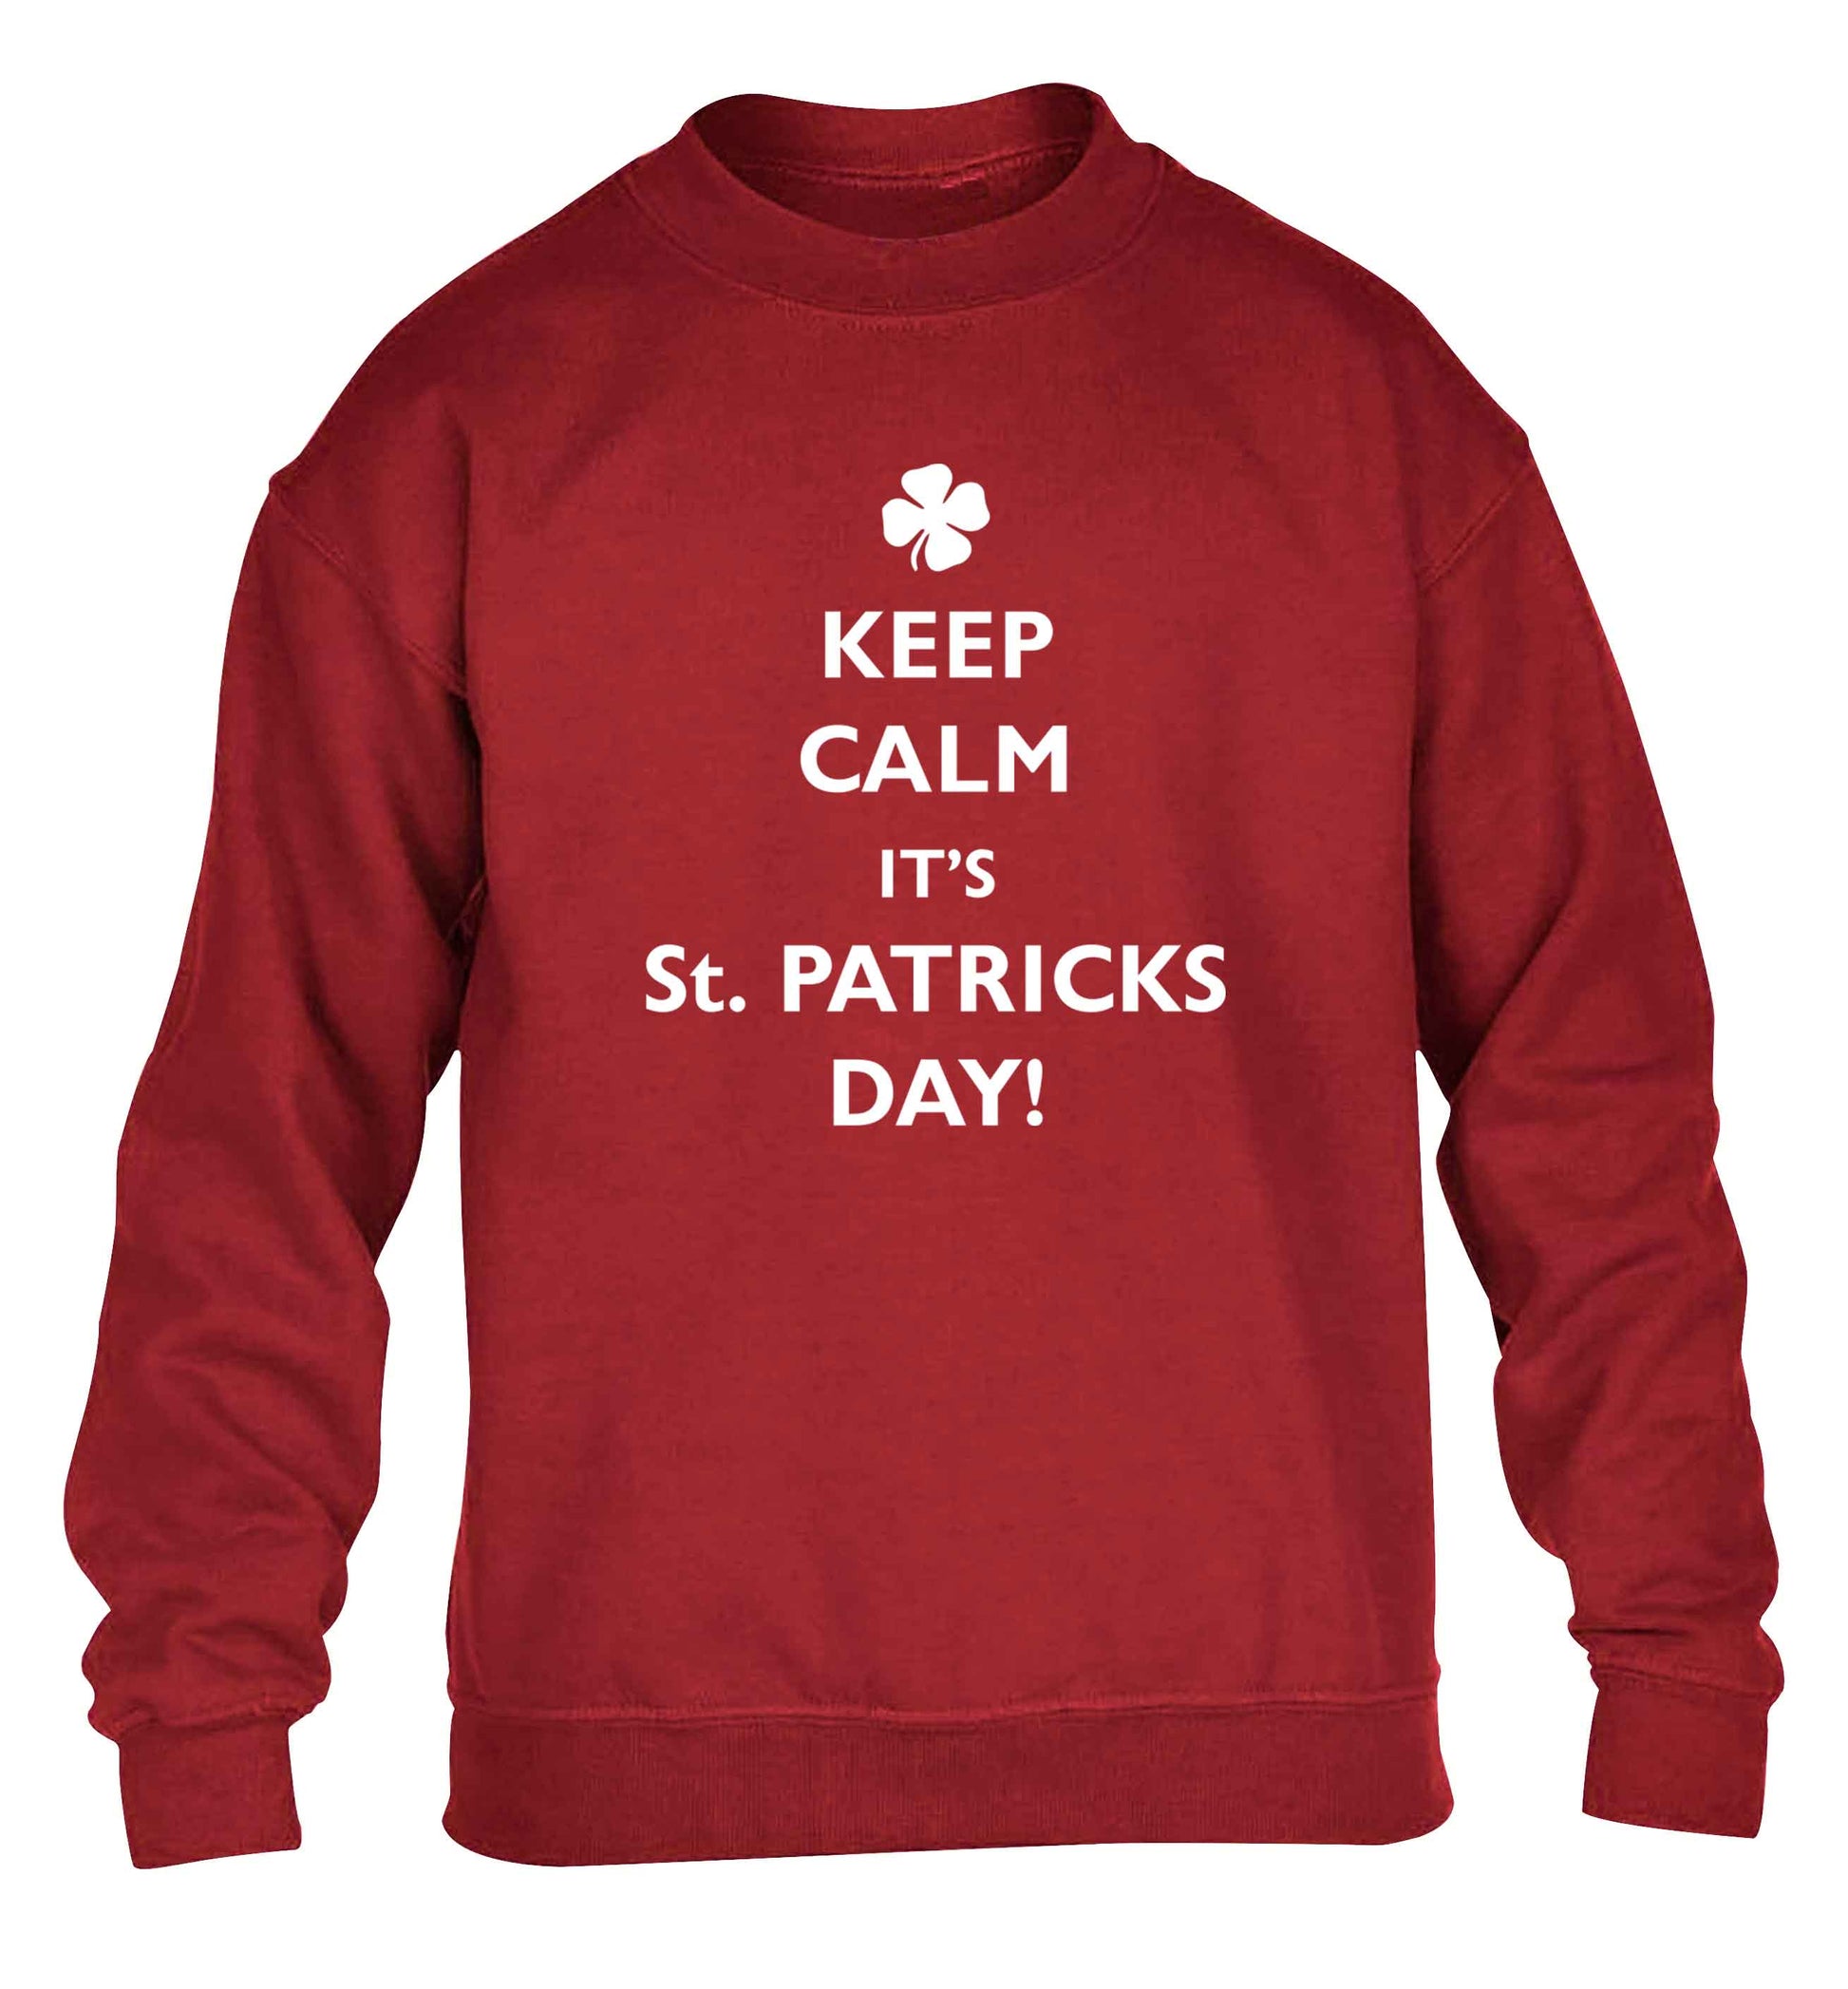 I can't keep calm it's St.Patricks day children's grey sweater 12-13 Years